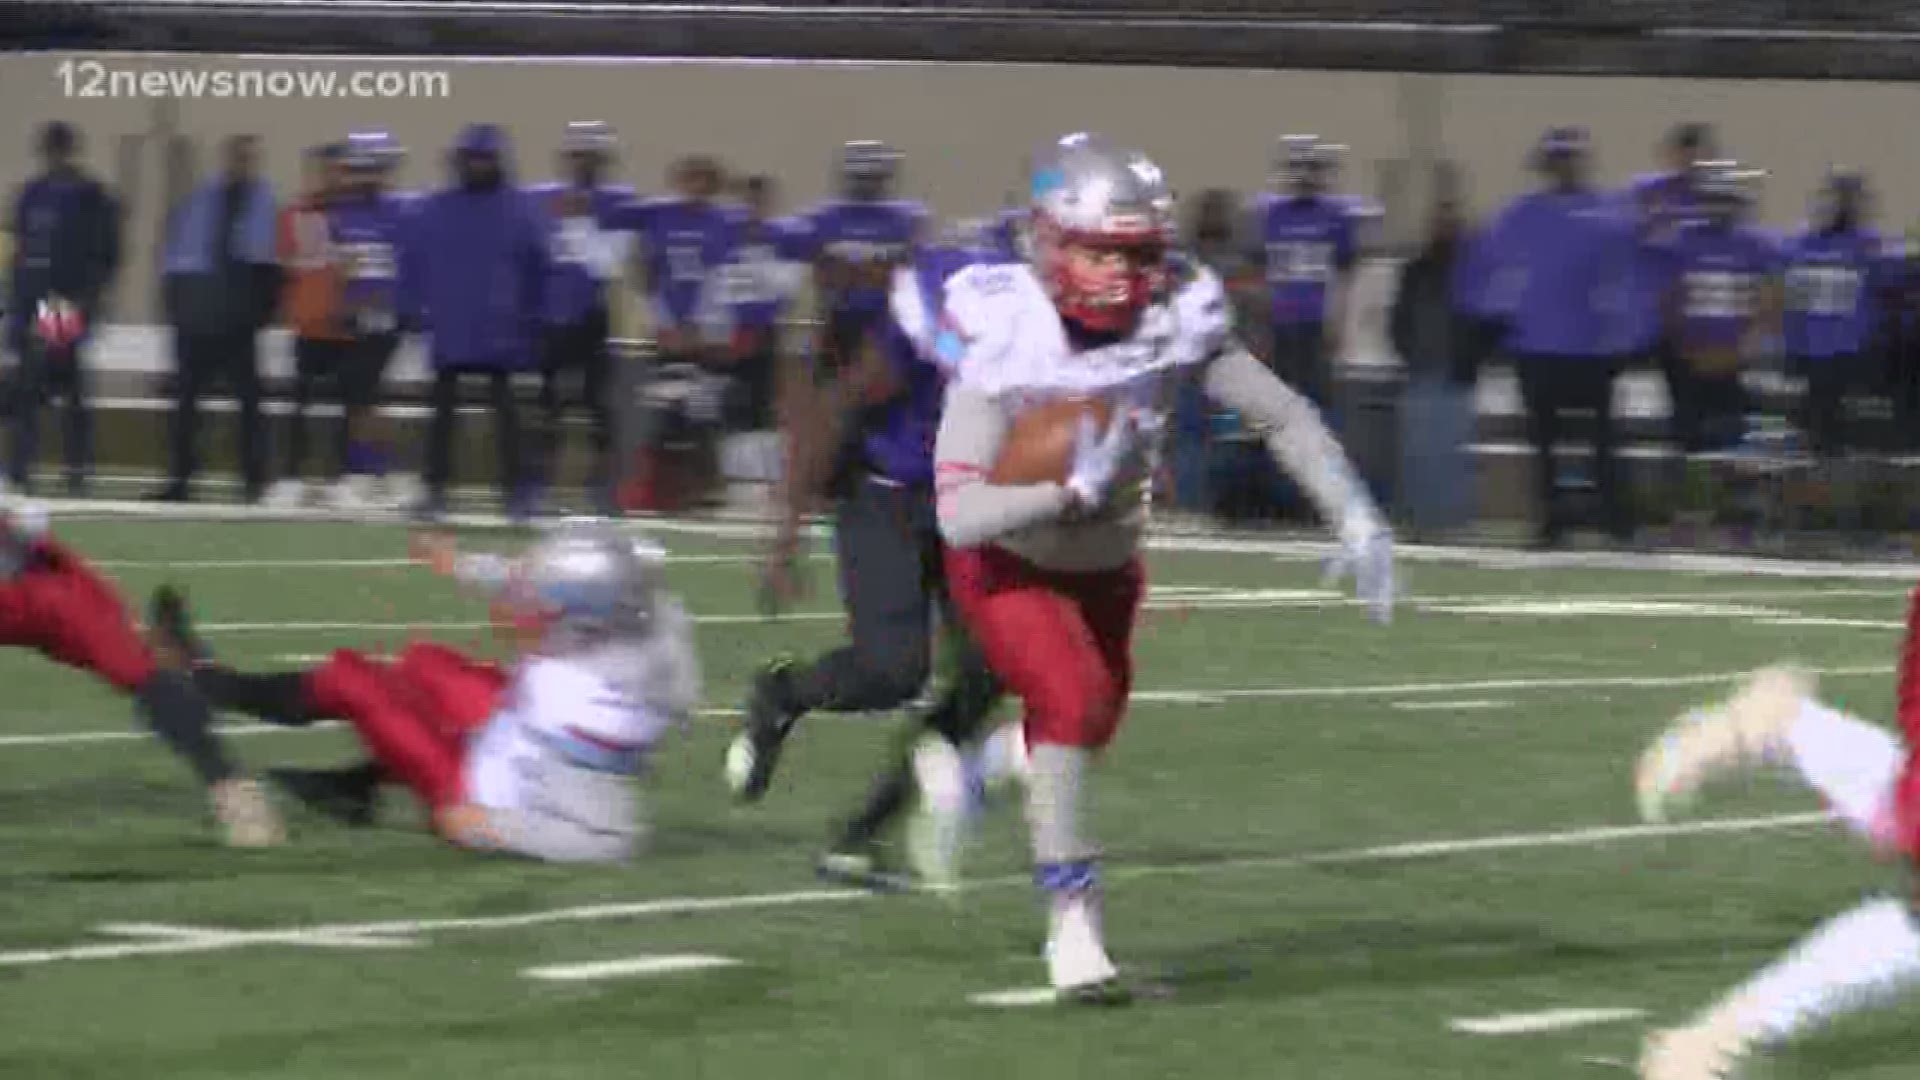 Lumberton jumped out to a 21-0 lead on Thursday night in Baytown.